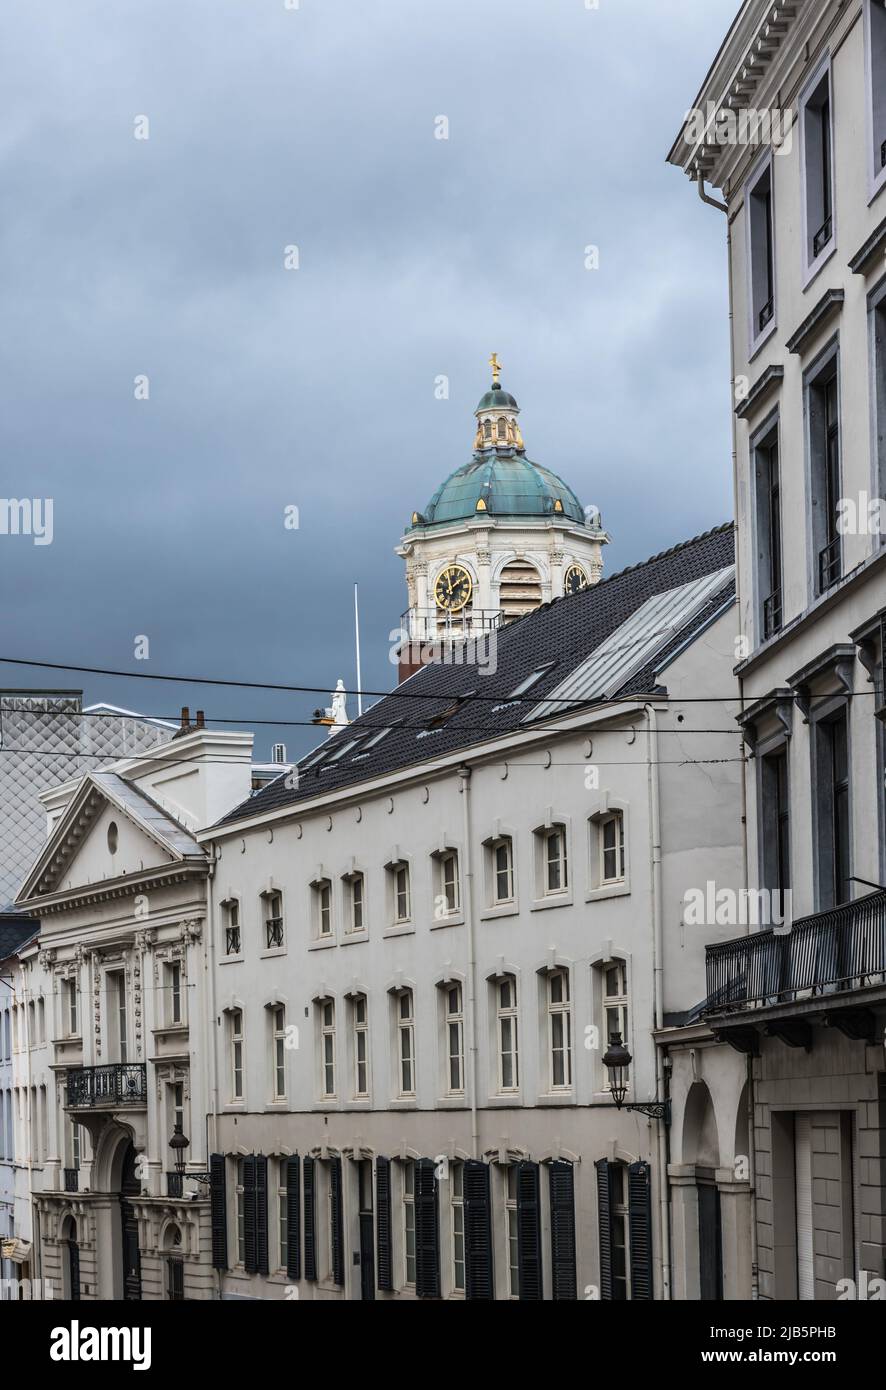 Brussels Old Town, Brussels Capital Region - Belgium - 12 20 2019 View over the Rue de Namur Naamse straat and the Coudenberg tower. Stock Photo